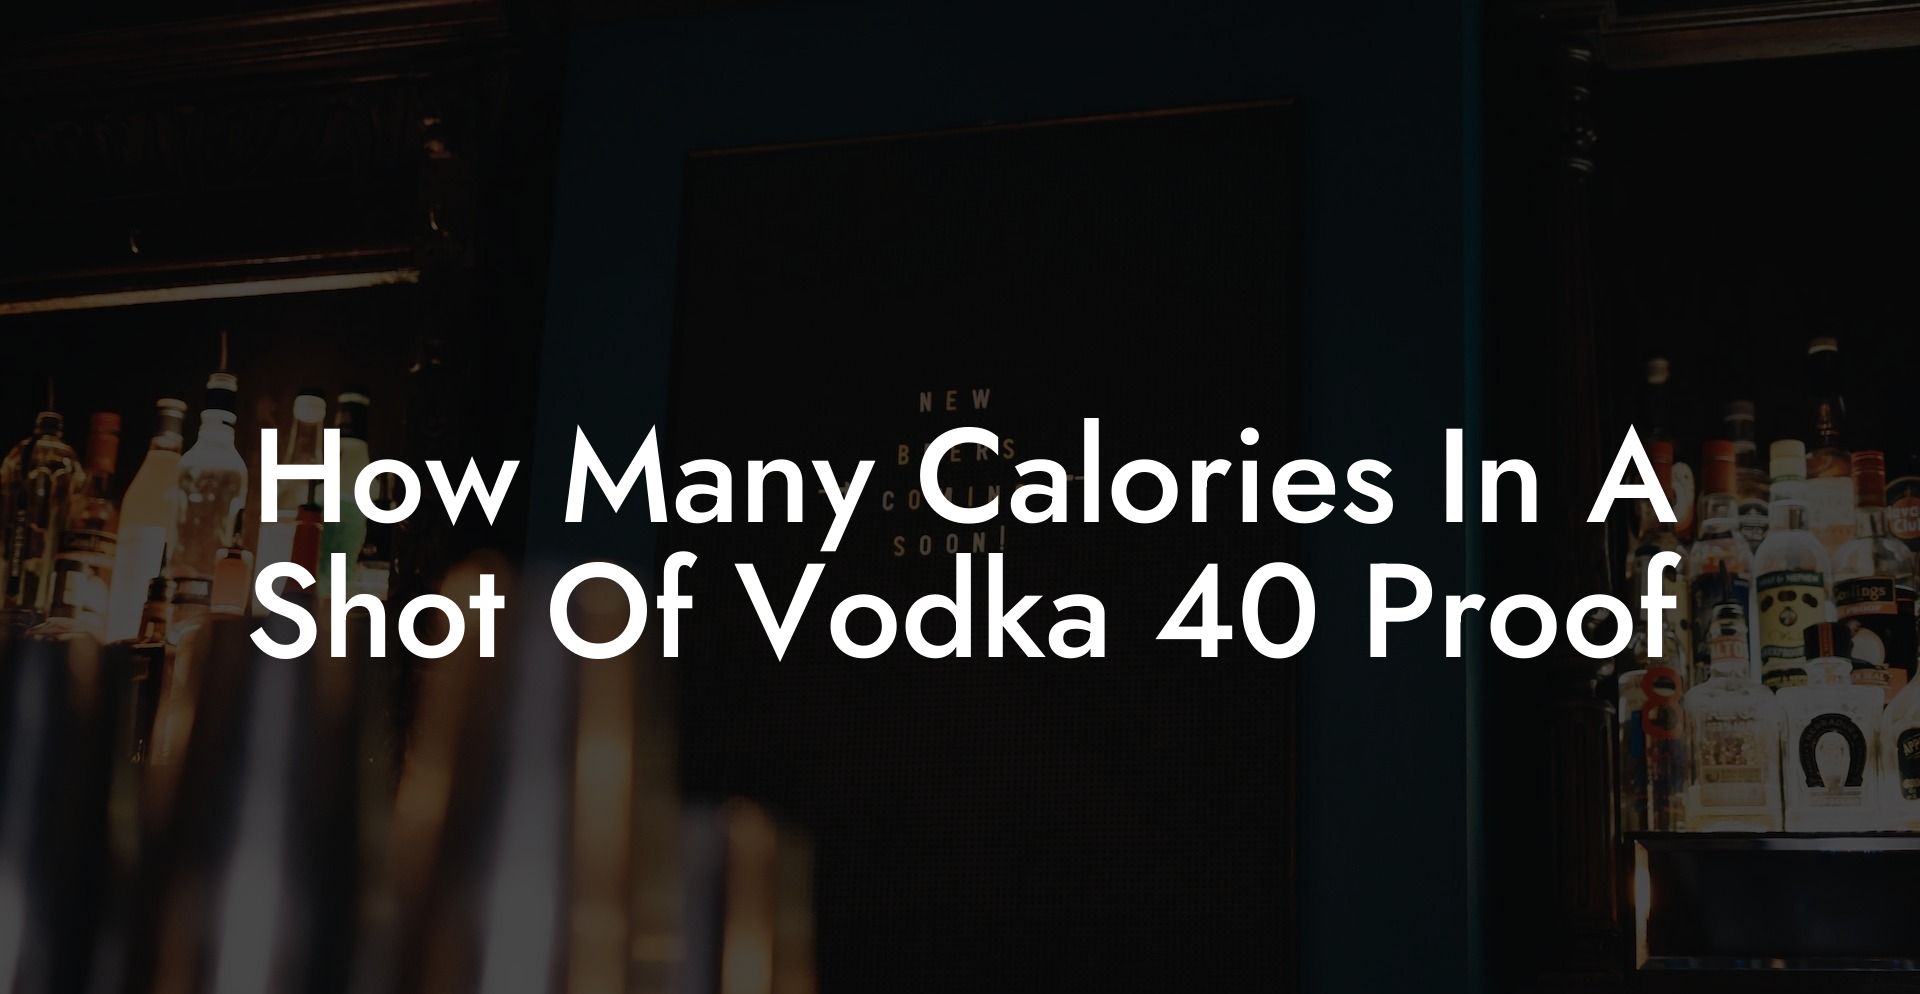 How Many Calories In A Shot Of Vodka 40 Proof